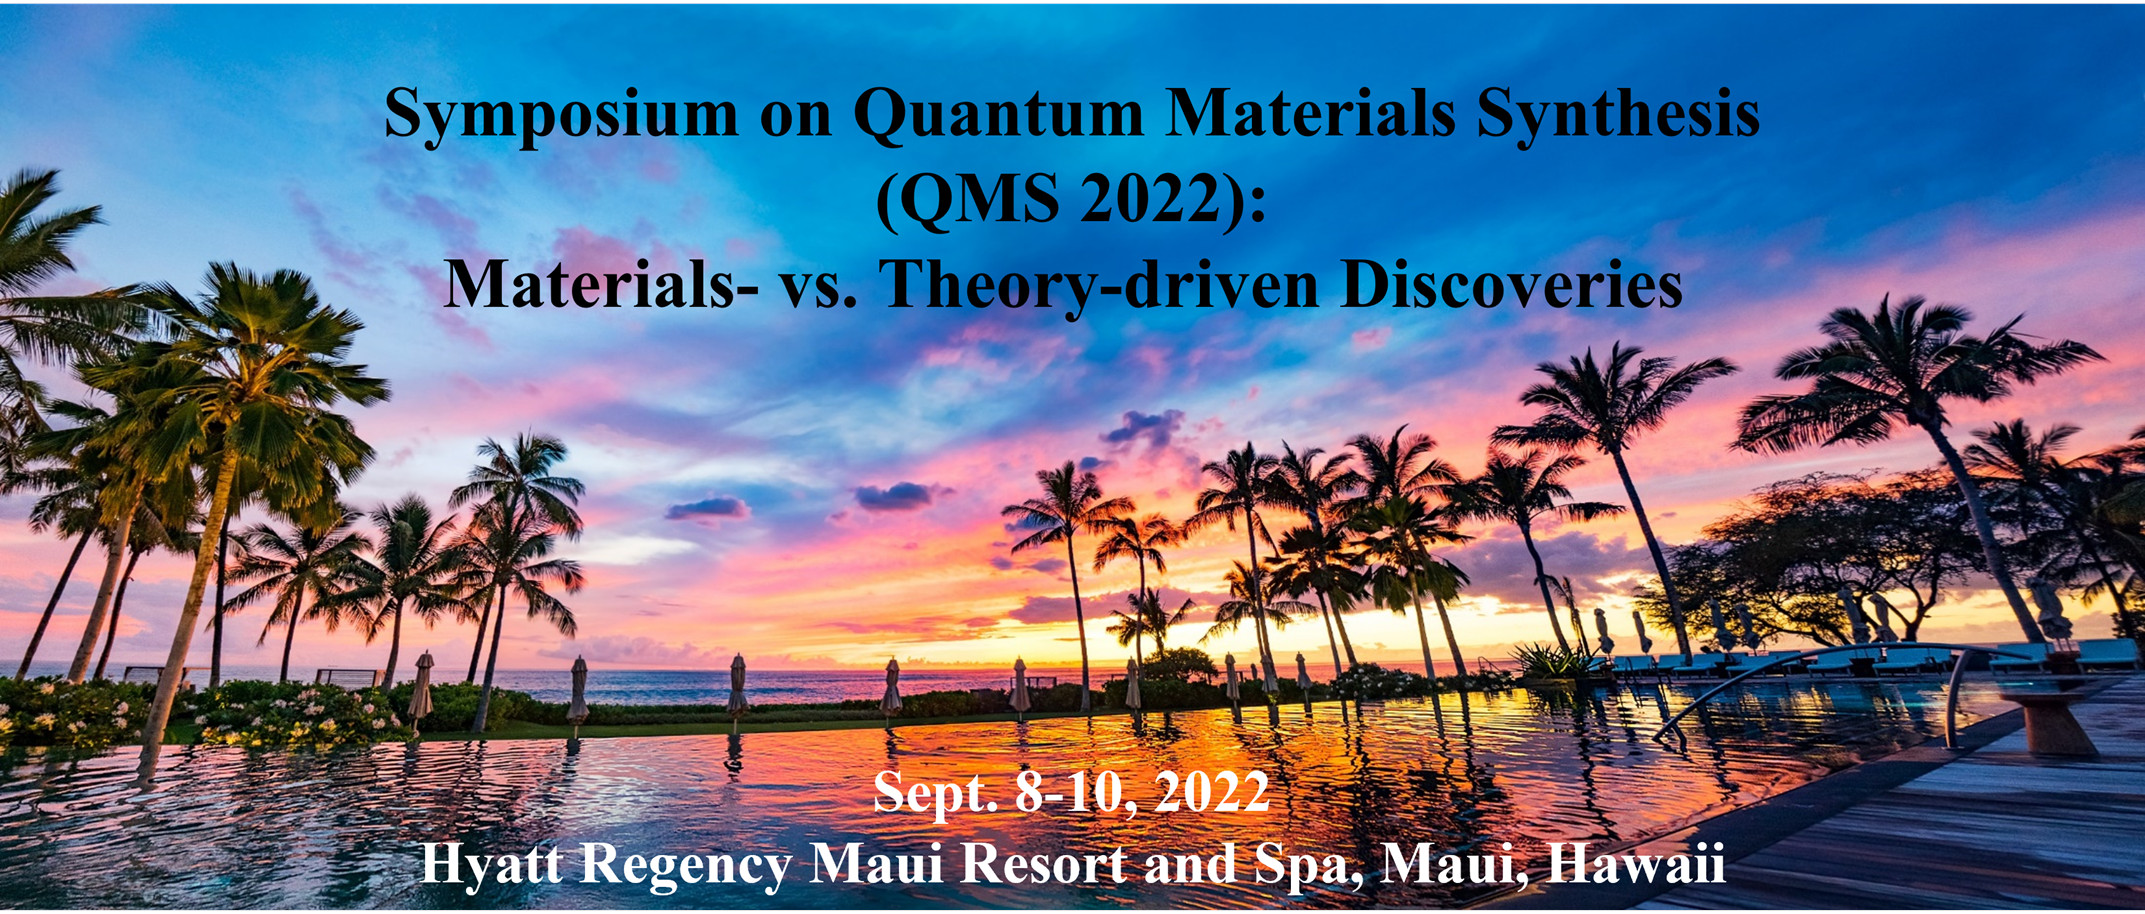 QMS2022 Materials vs Theory driven Discoveries announcement image